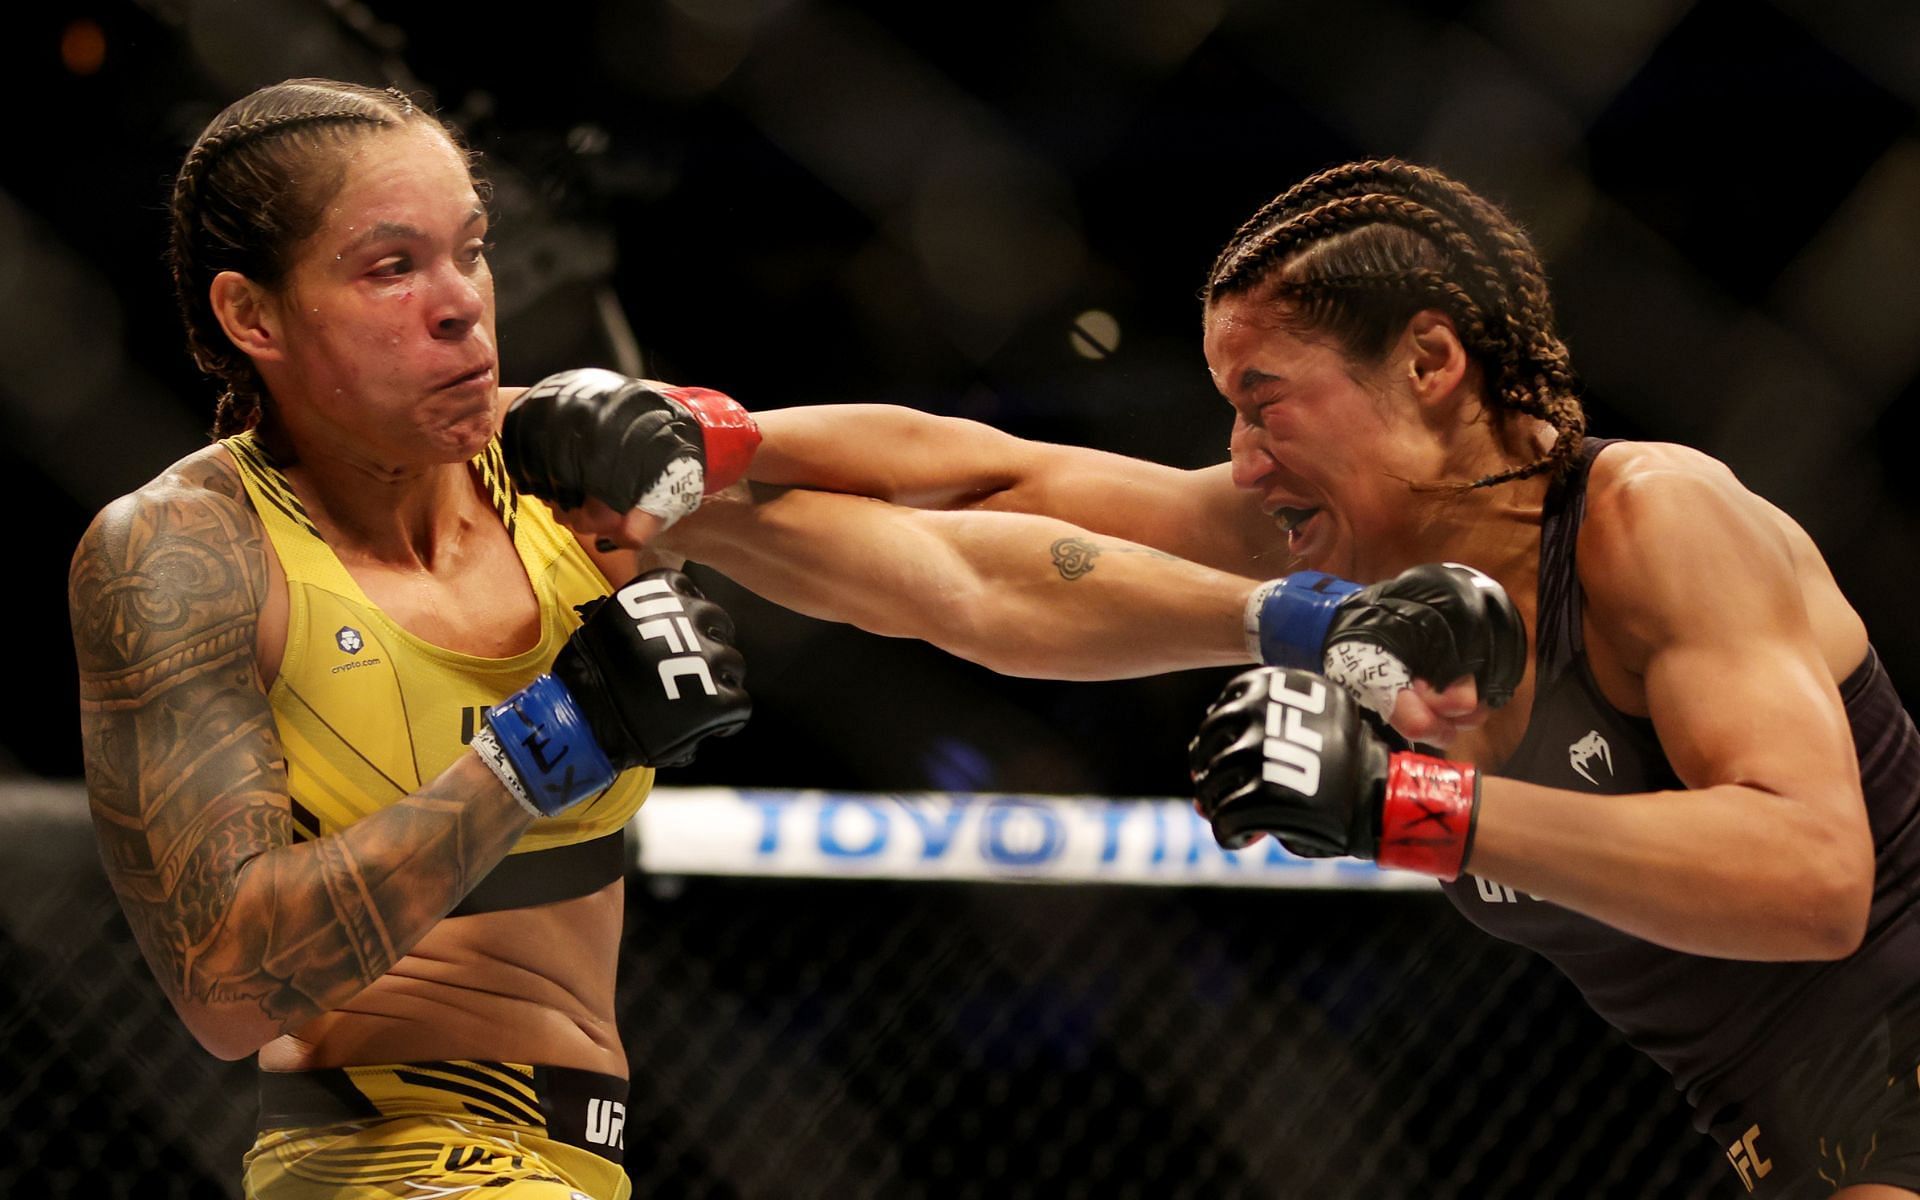 Amanda Nunes (left) and Julianna Pena (right) in action at UFC 277